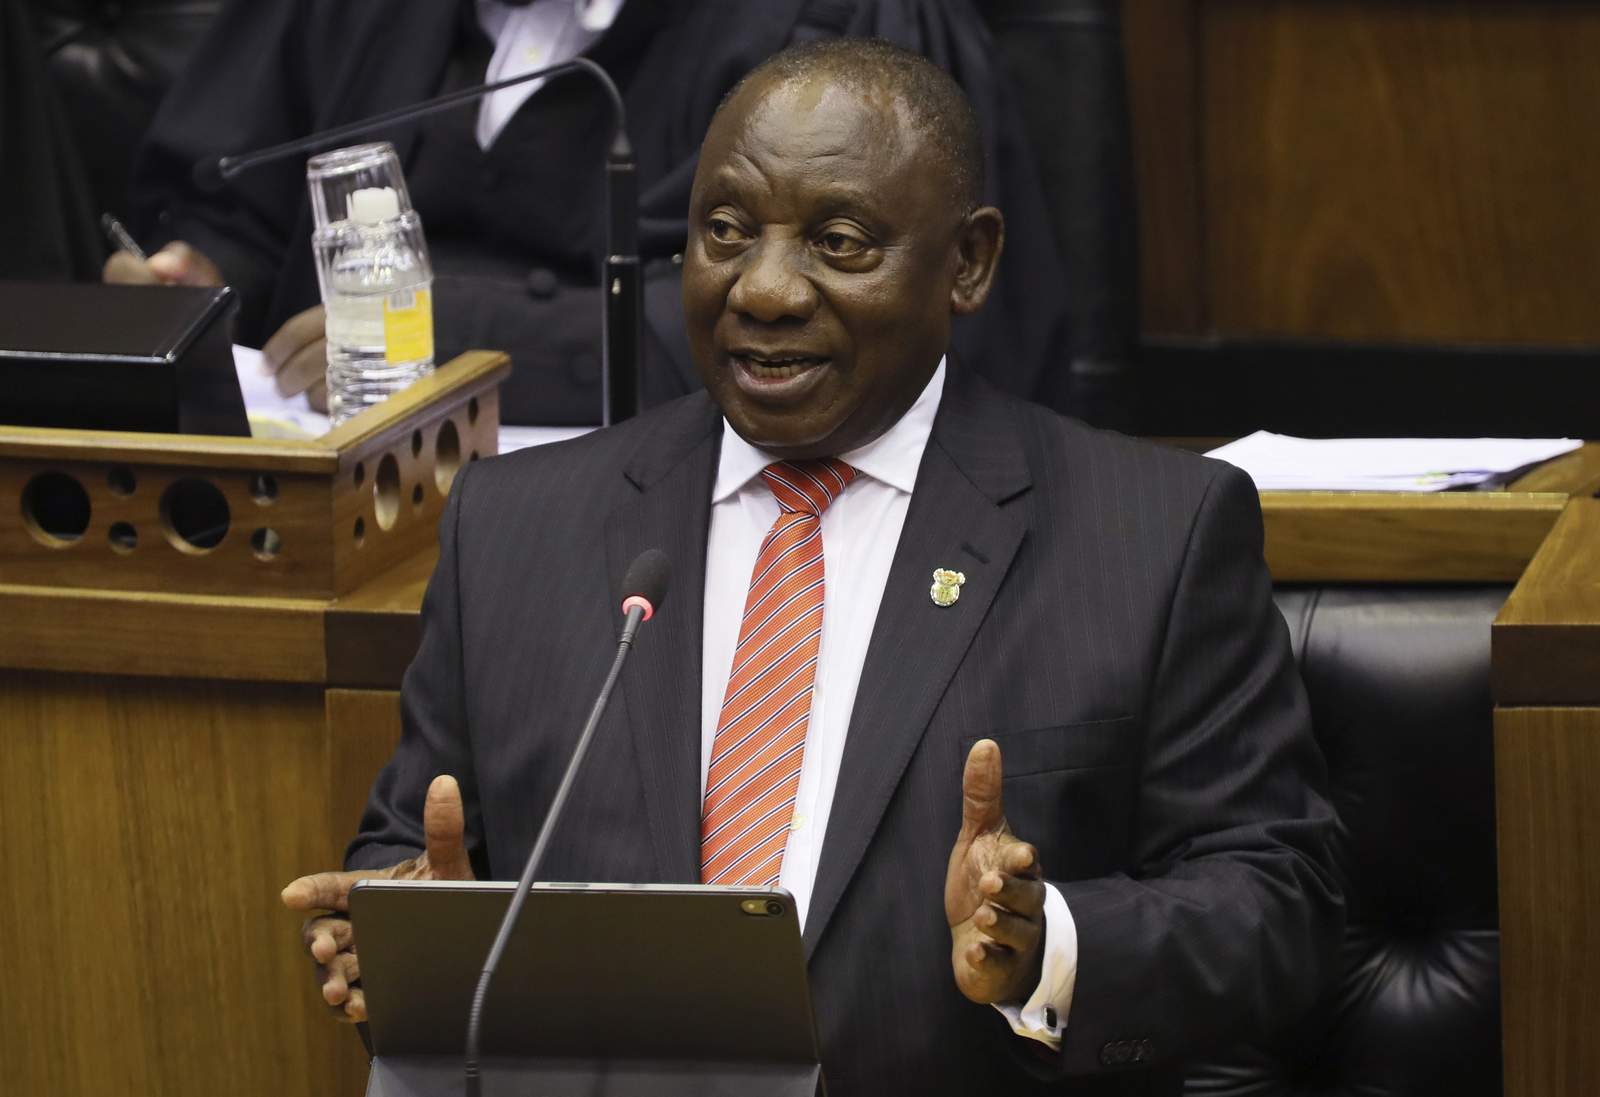 South African president grilled over COVID-19 graft scandals